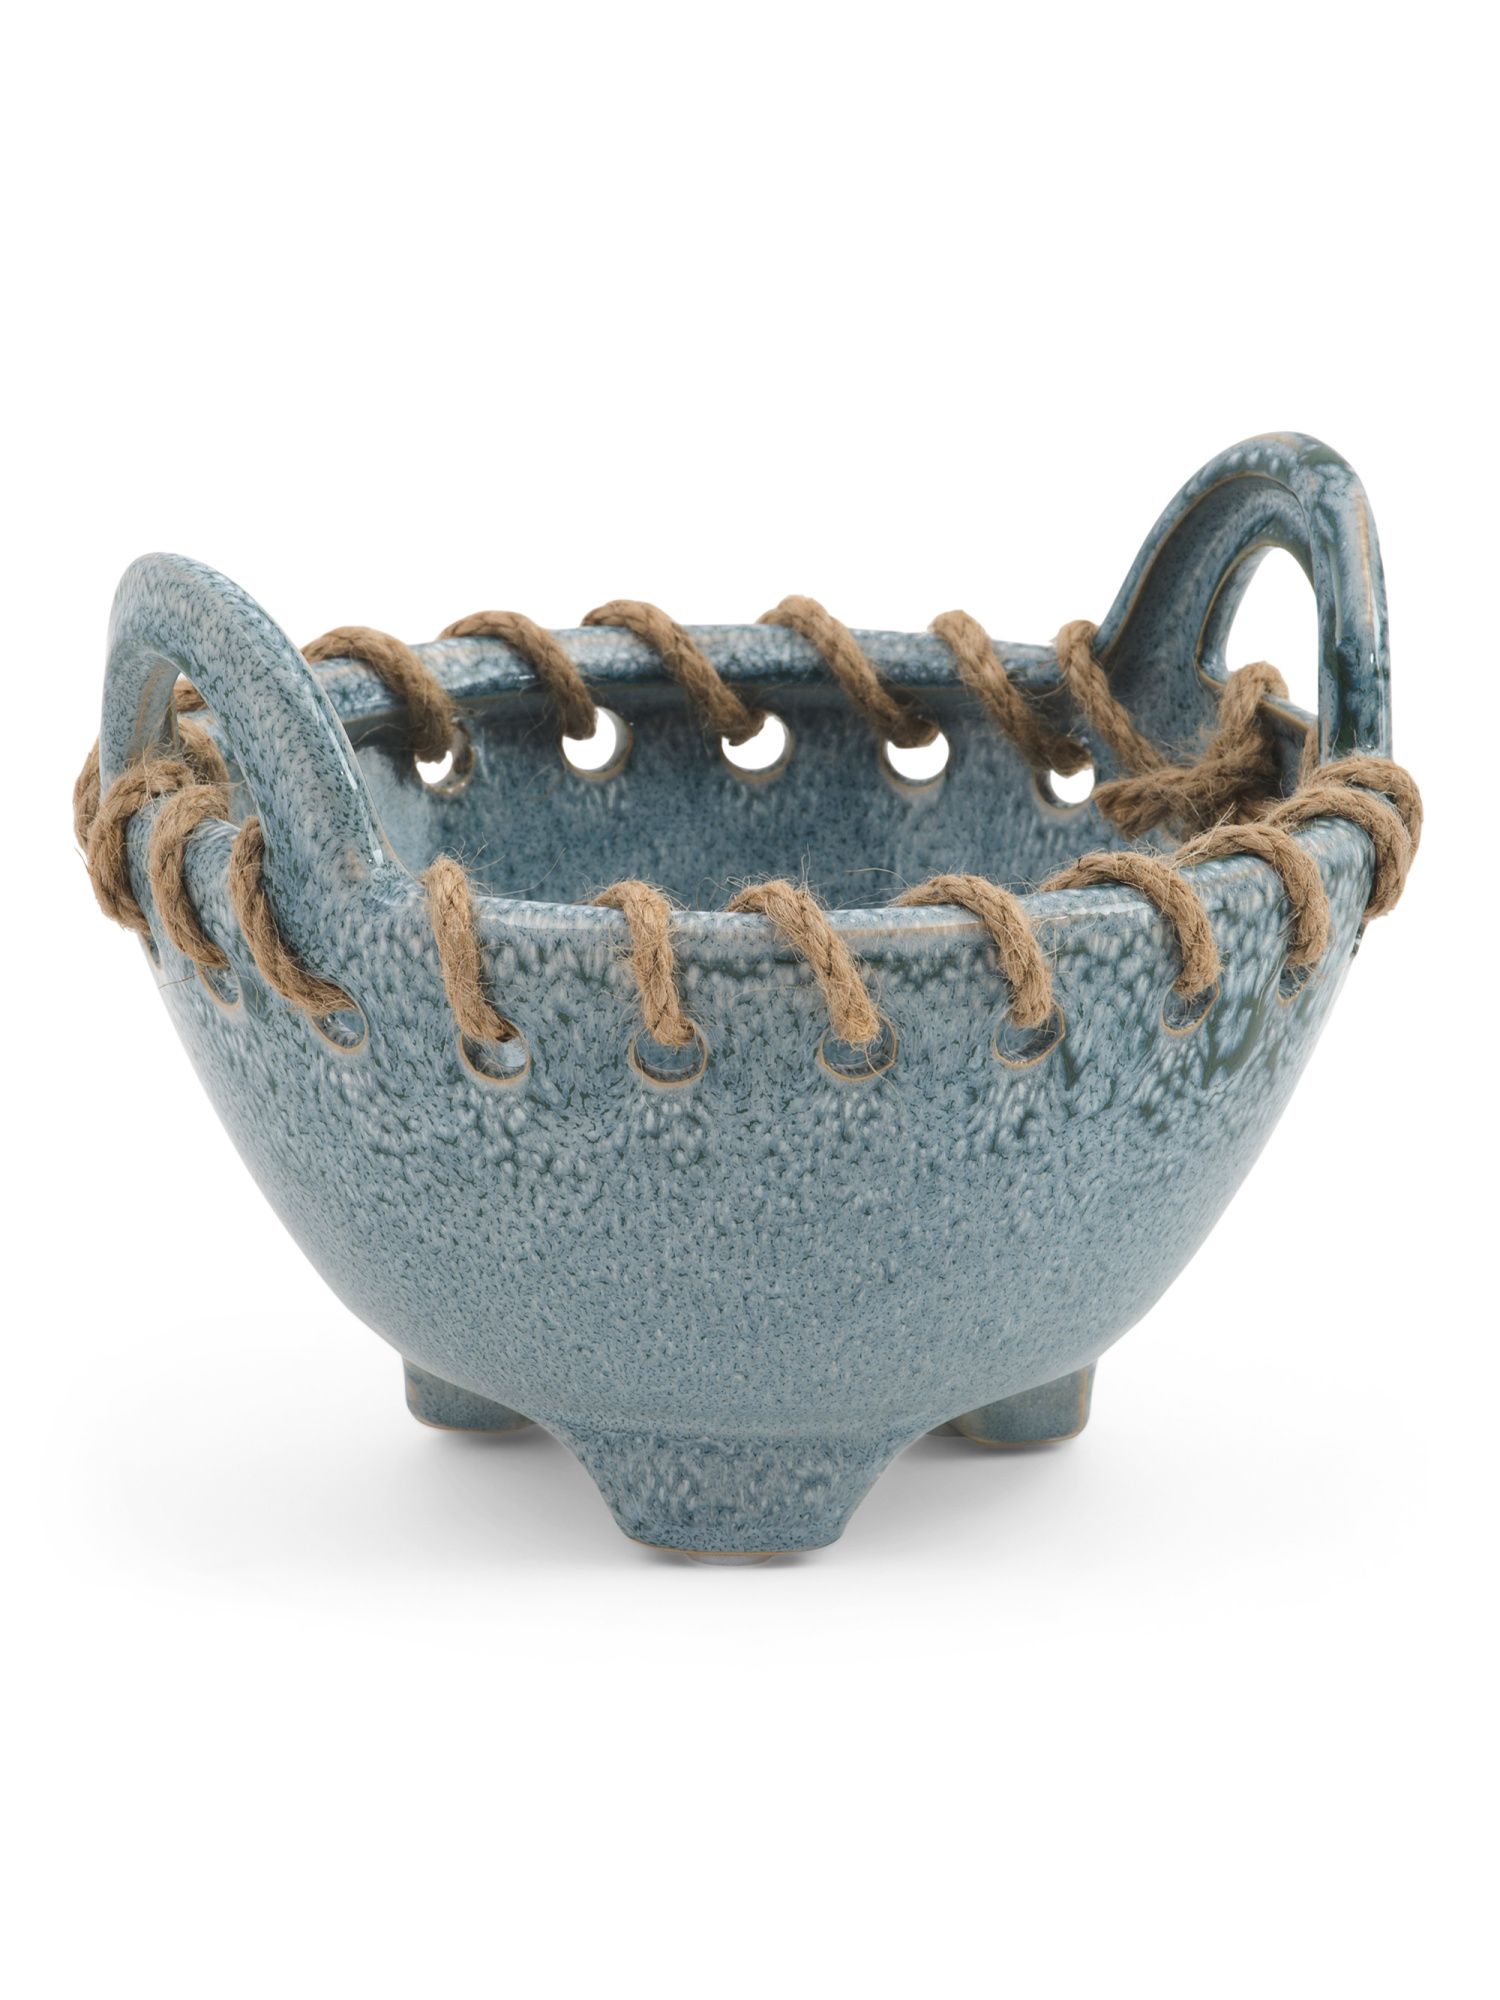 Decorative Bowl With Rope | TJ Maxx